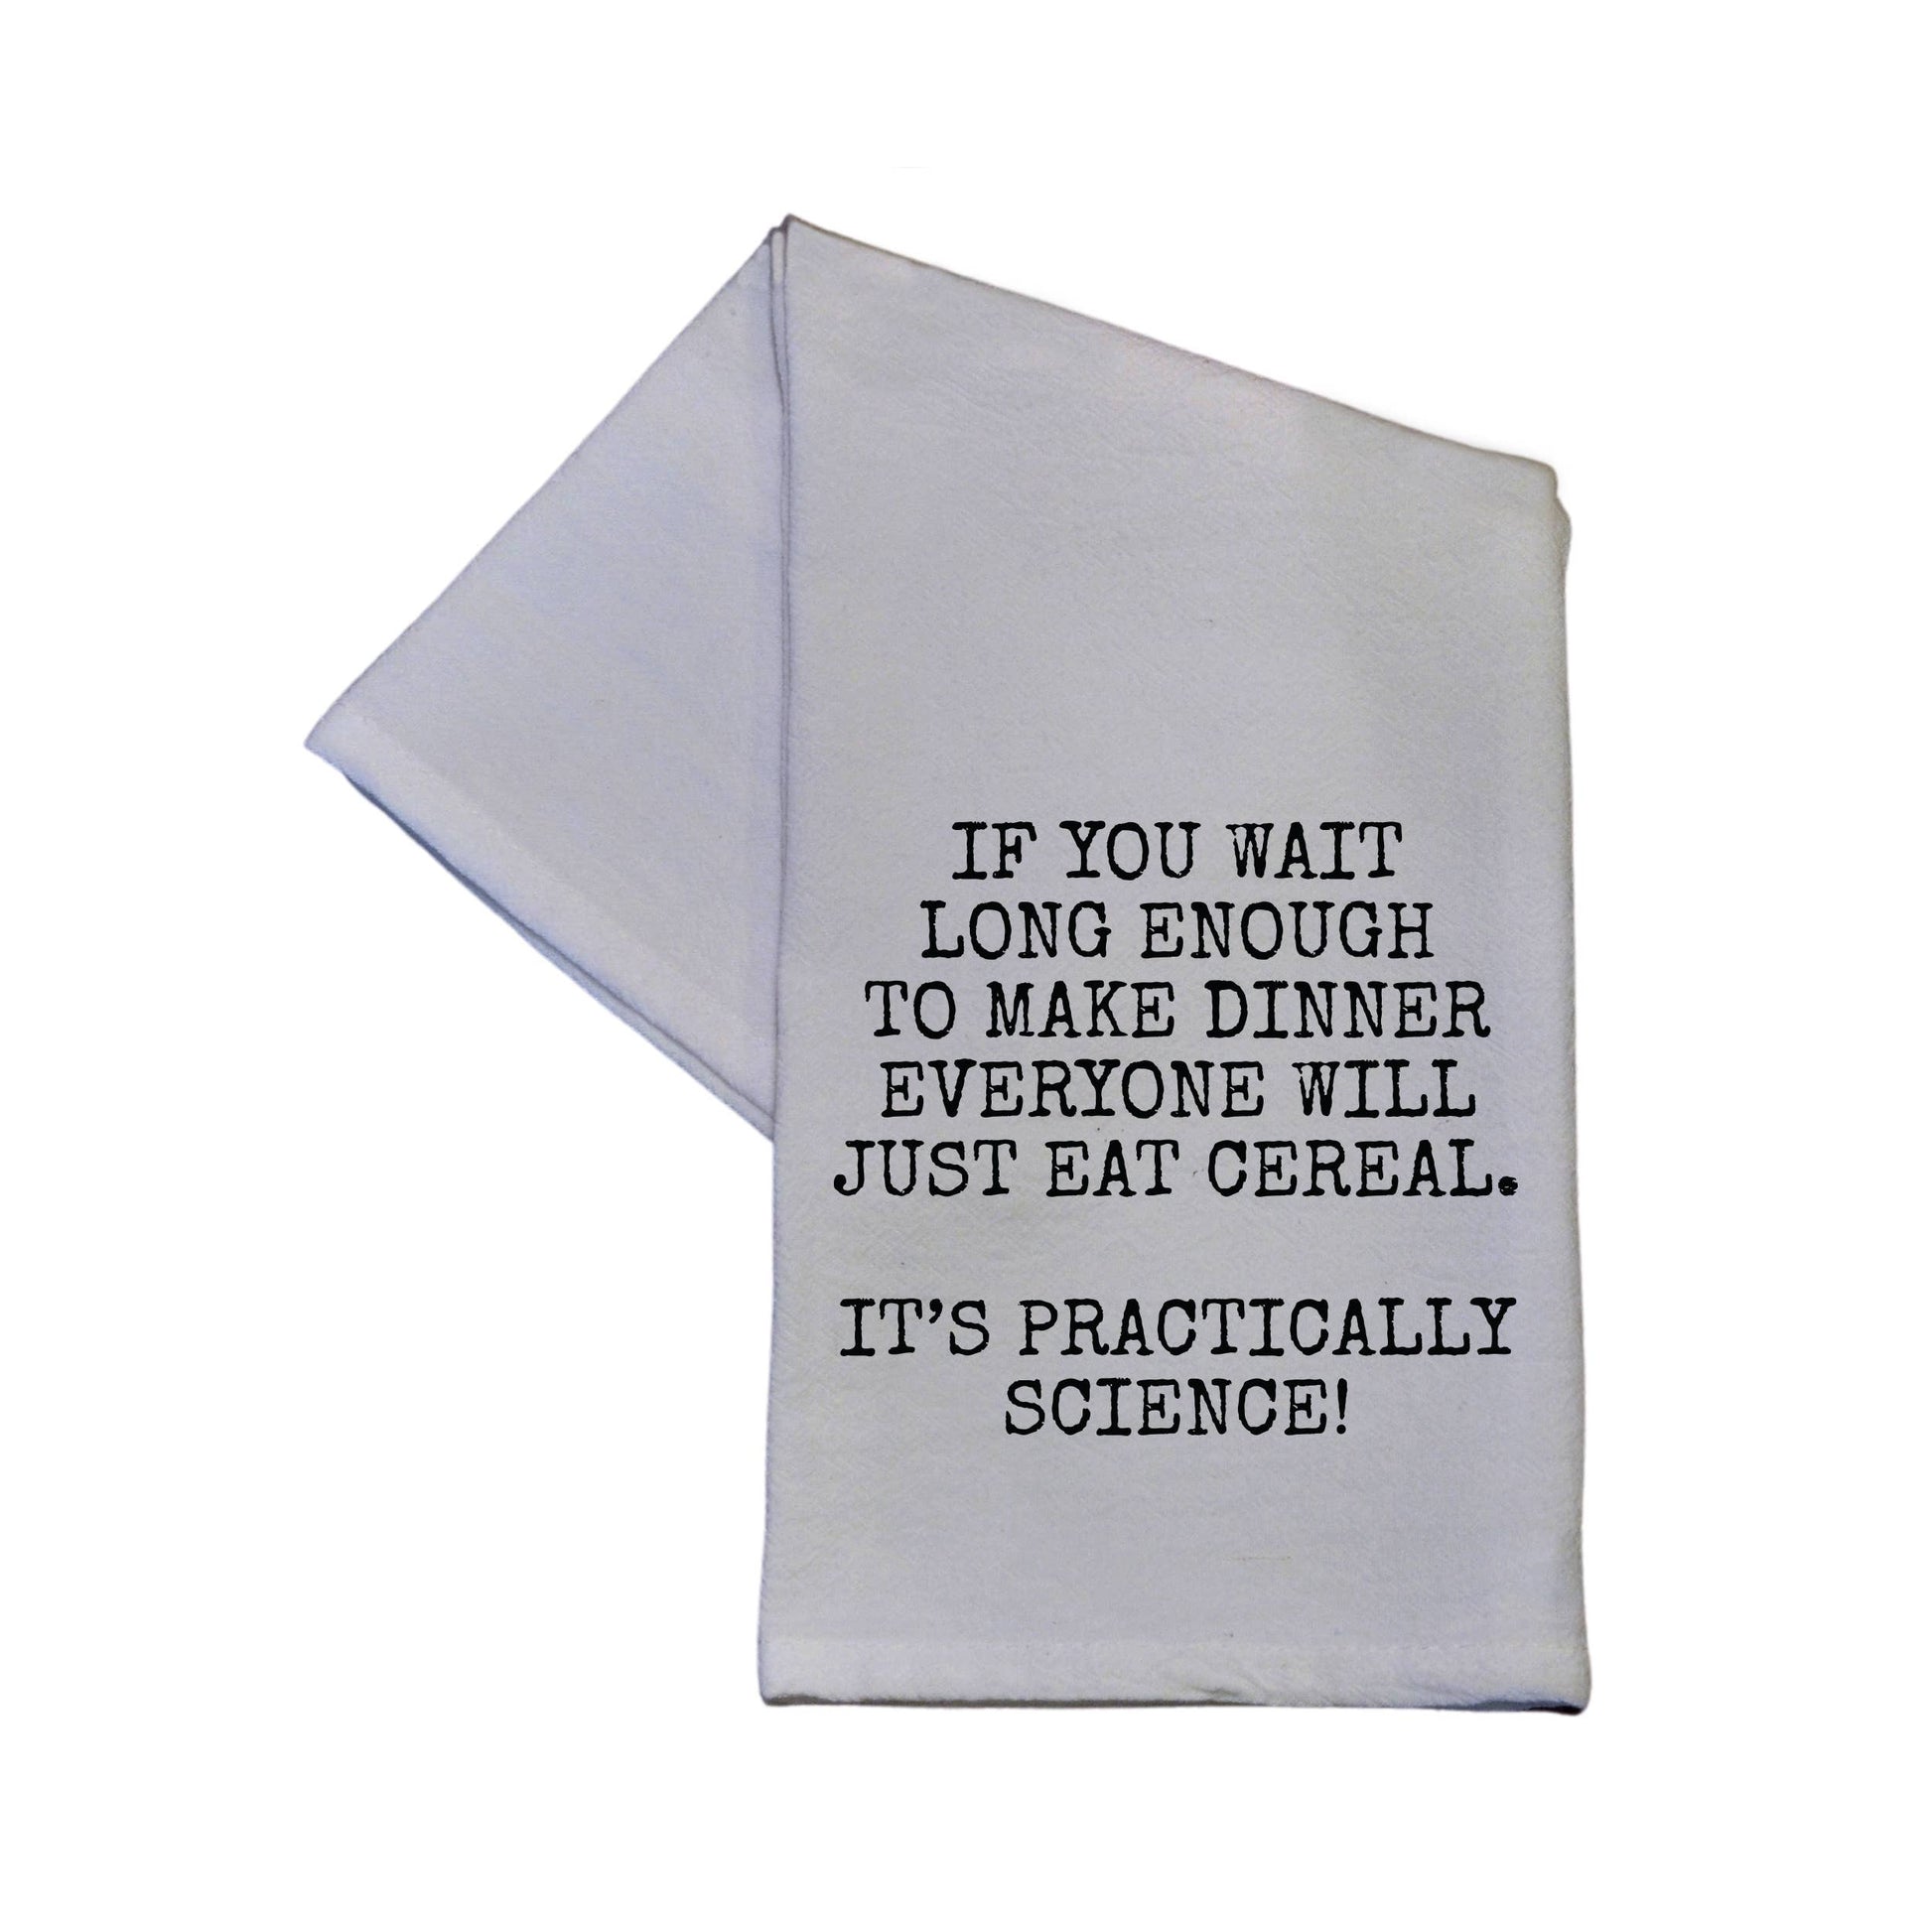 It's Practically Science Funny Dish Towel 16x24 JT's Designer Fashion